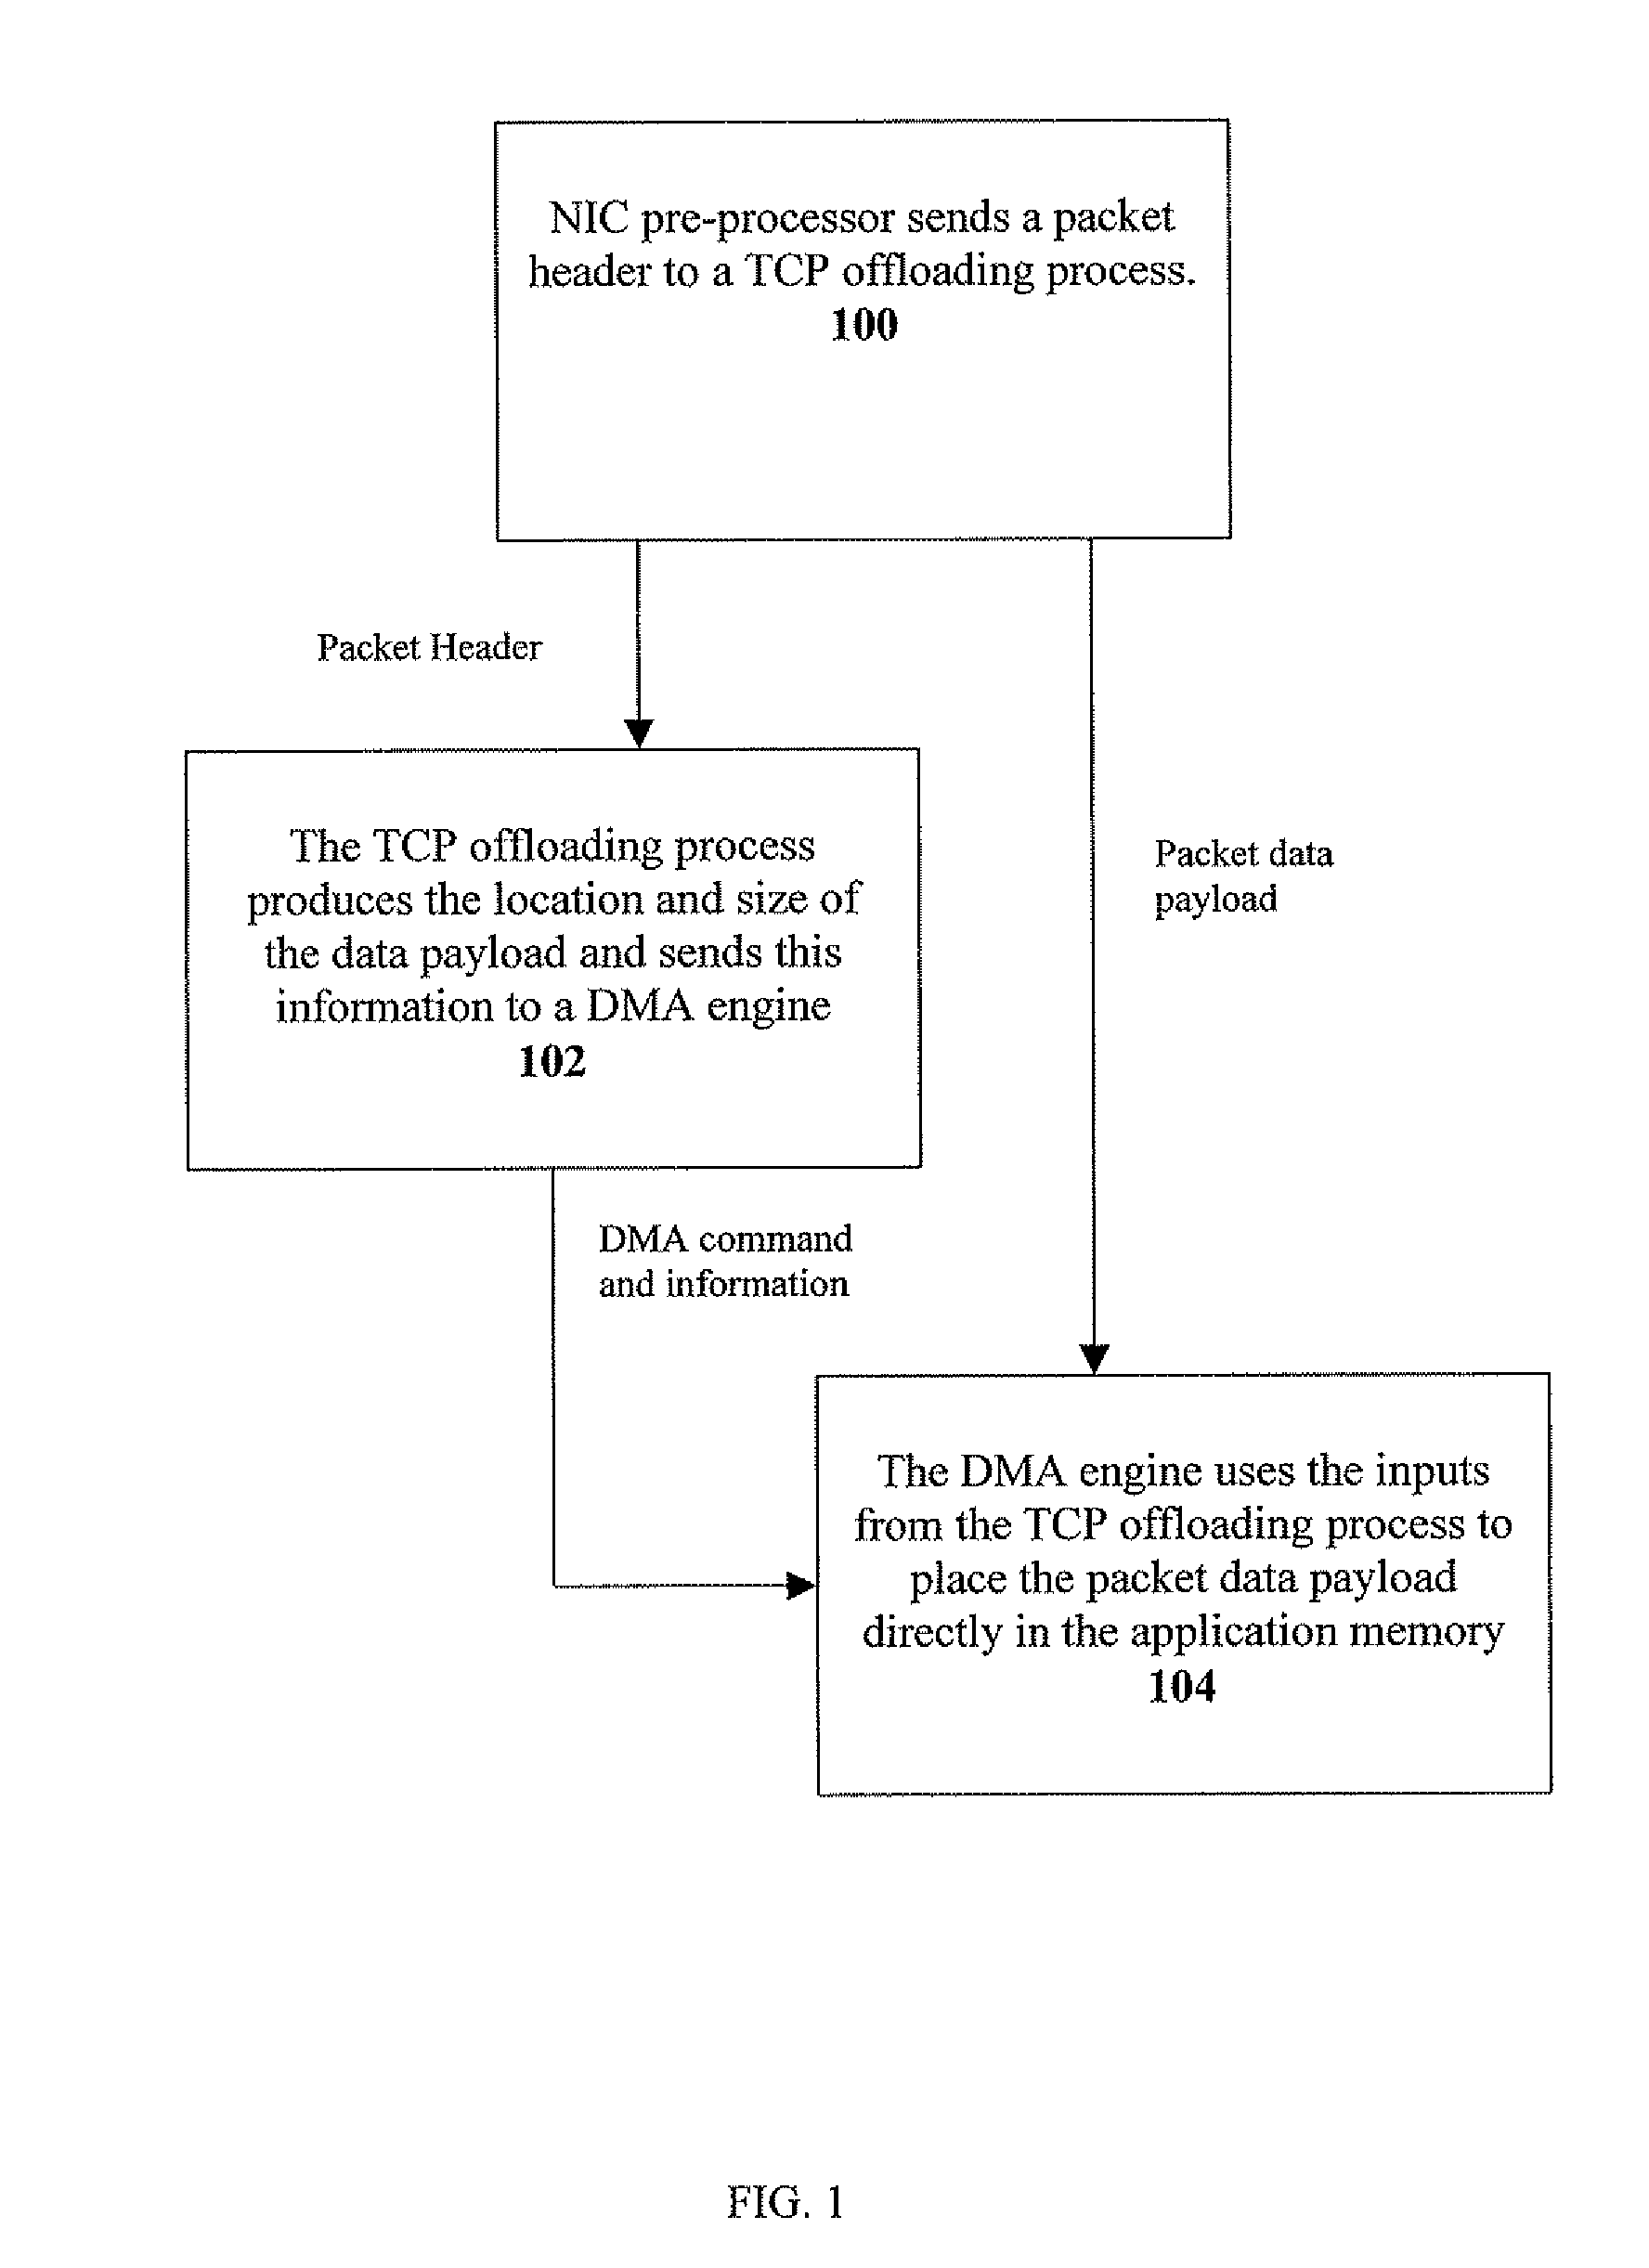 Direct Assembly Of A Data Payload In An Application Memory